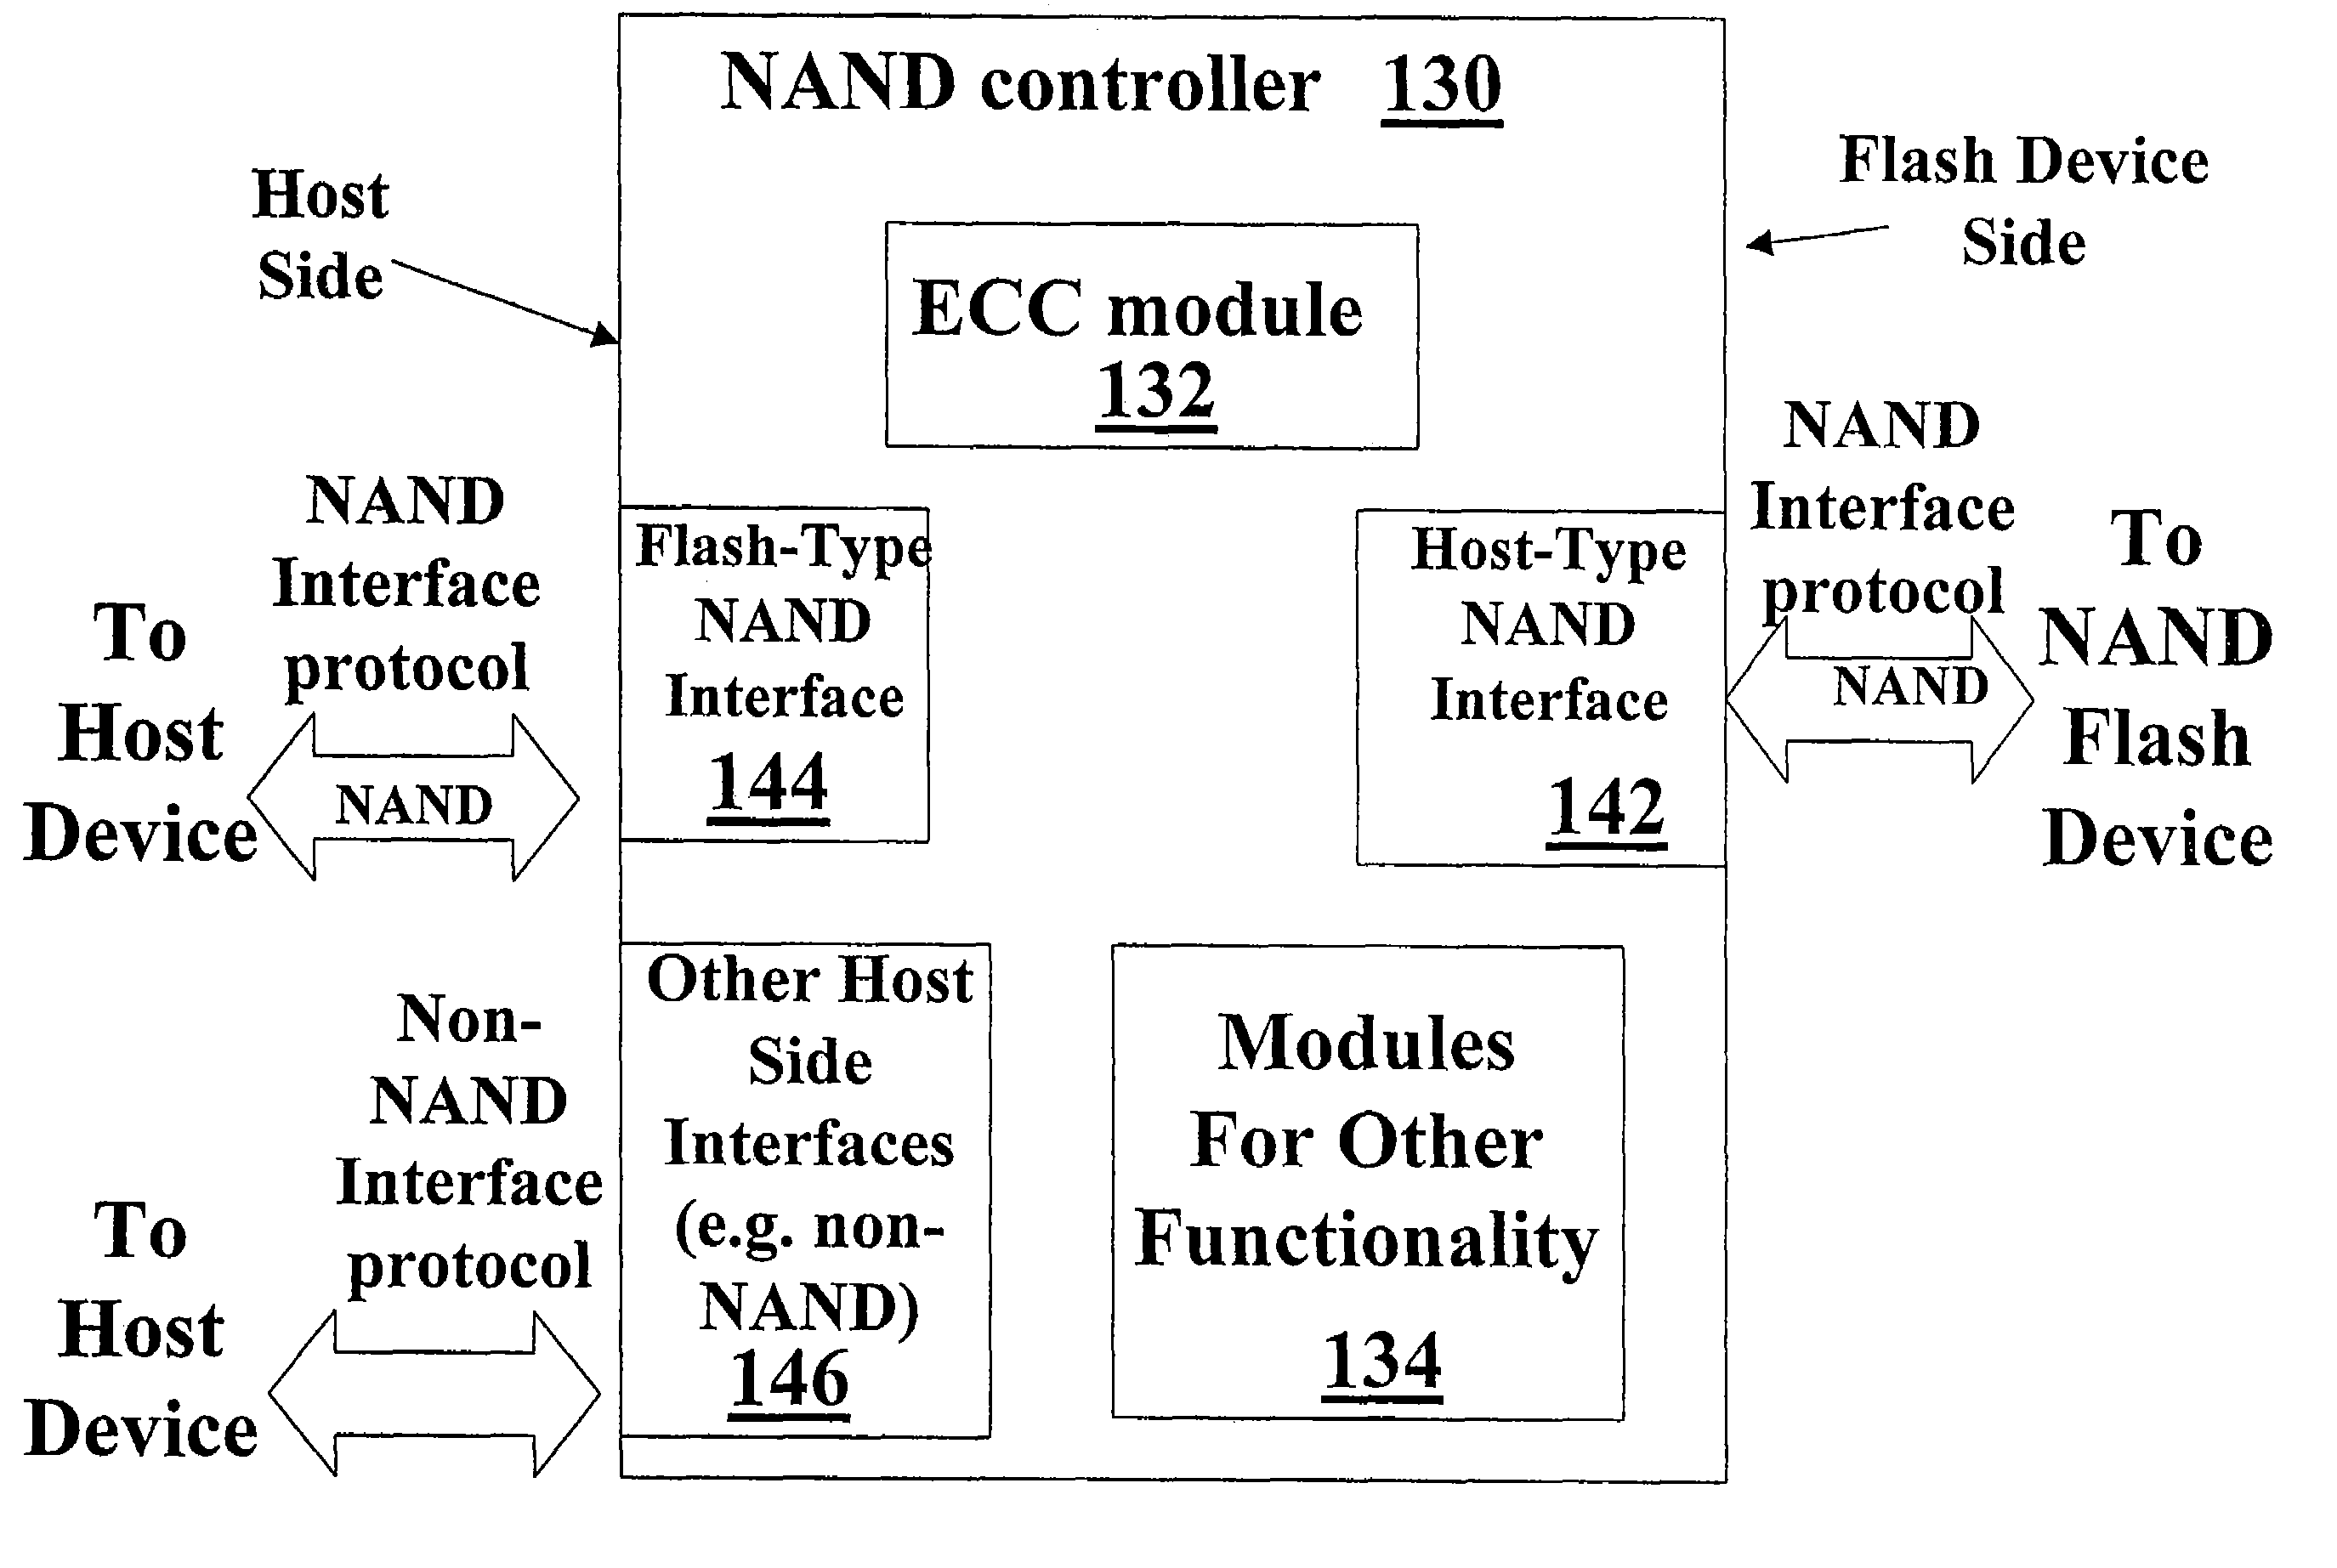 NAND flash memory controller exporting a NAND interface